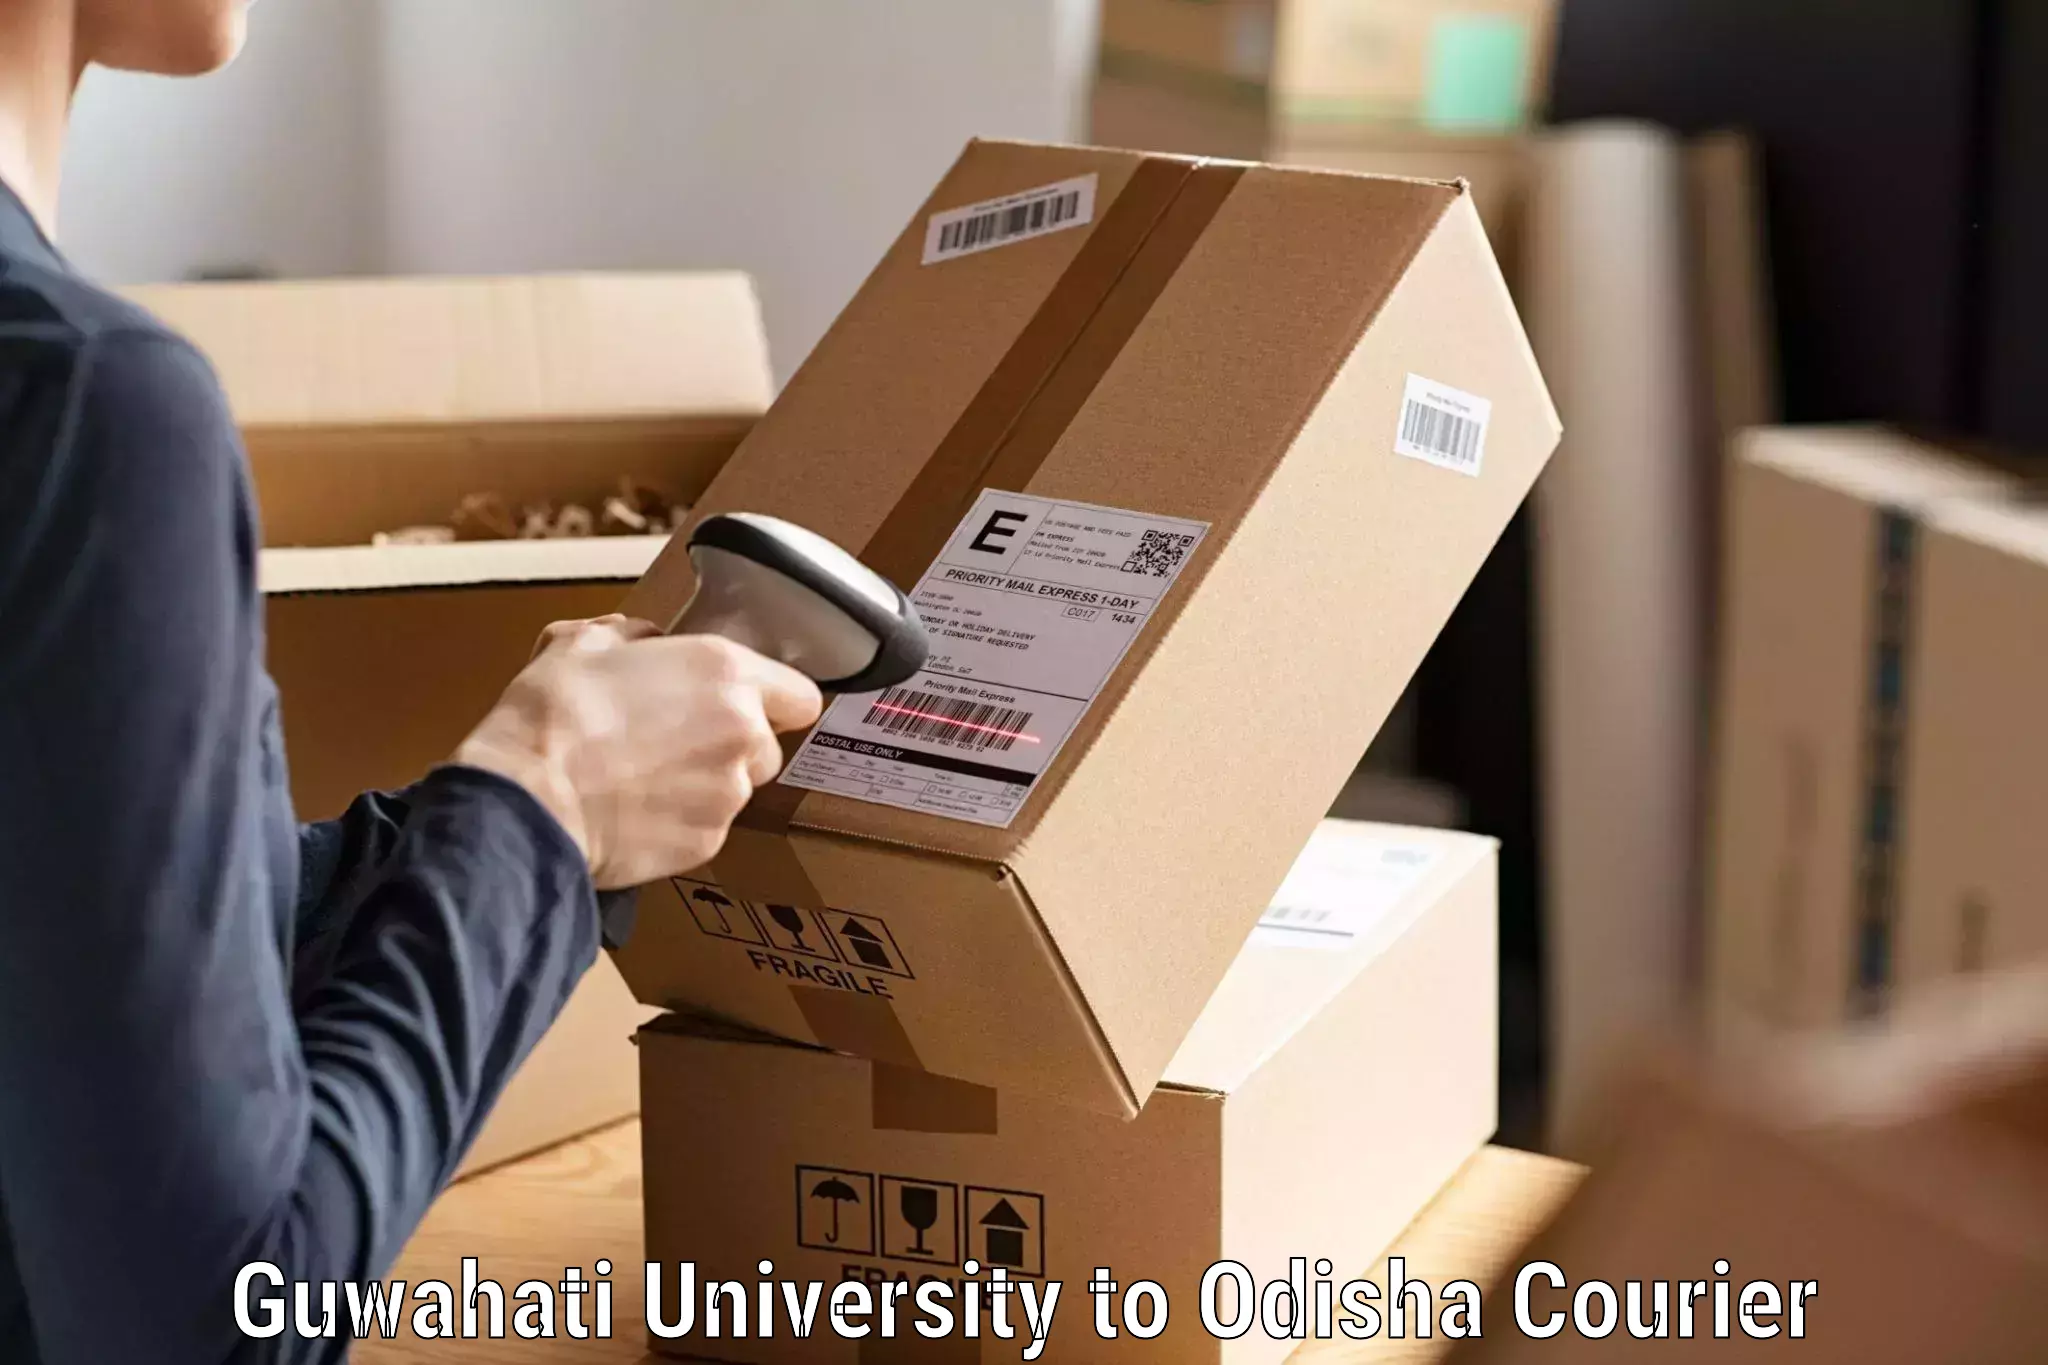 Next-generation courier services in Guwahati University to Odisha